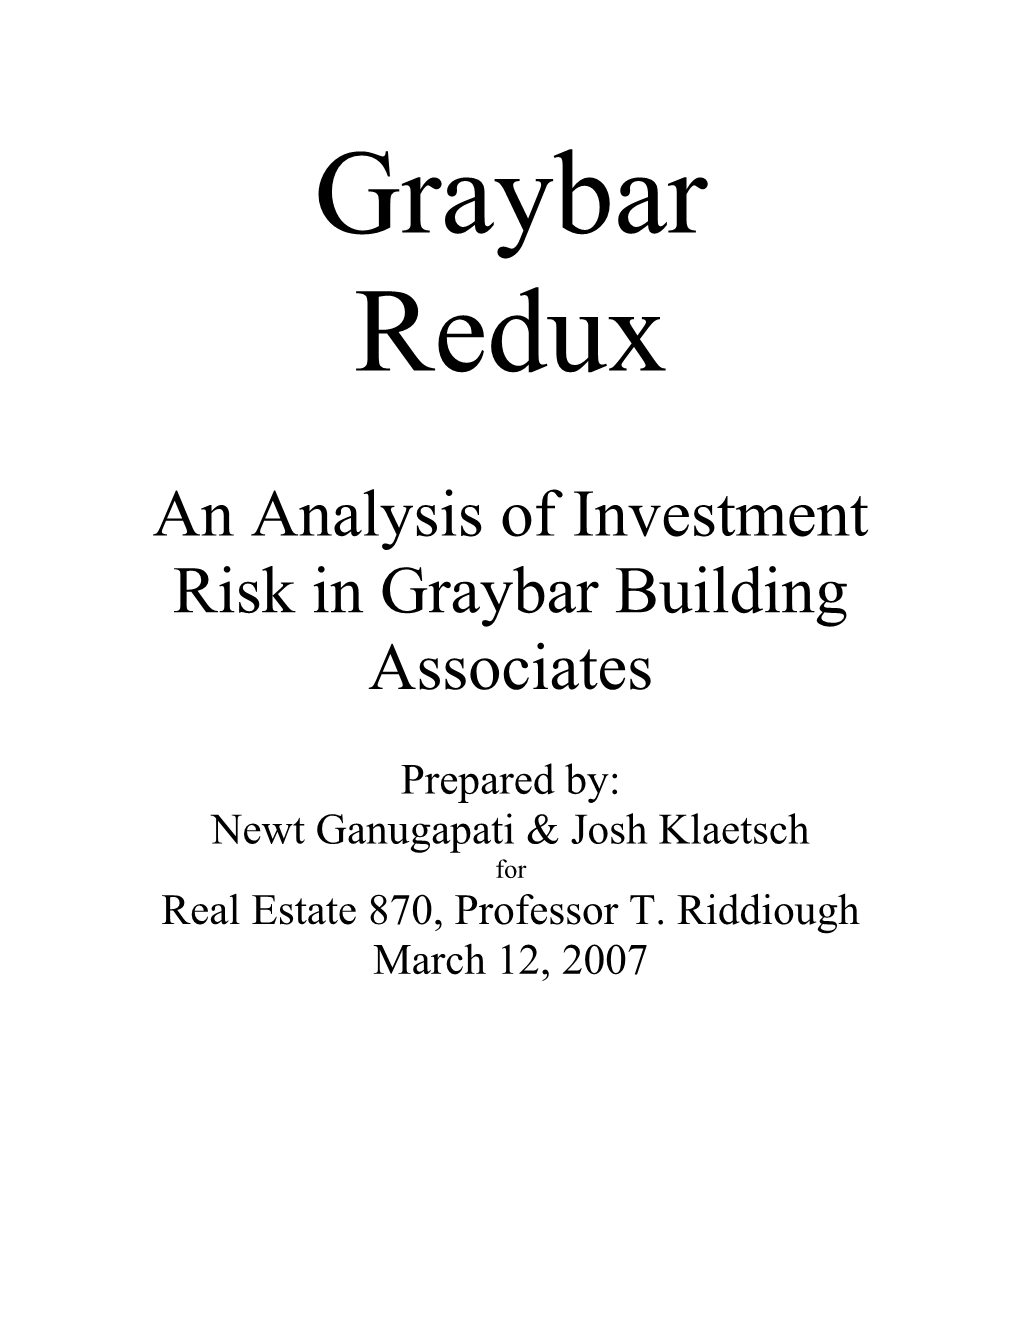 An Analysis of Investment Risk in Graybarbuilding Associates